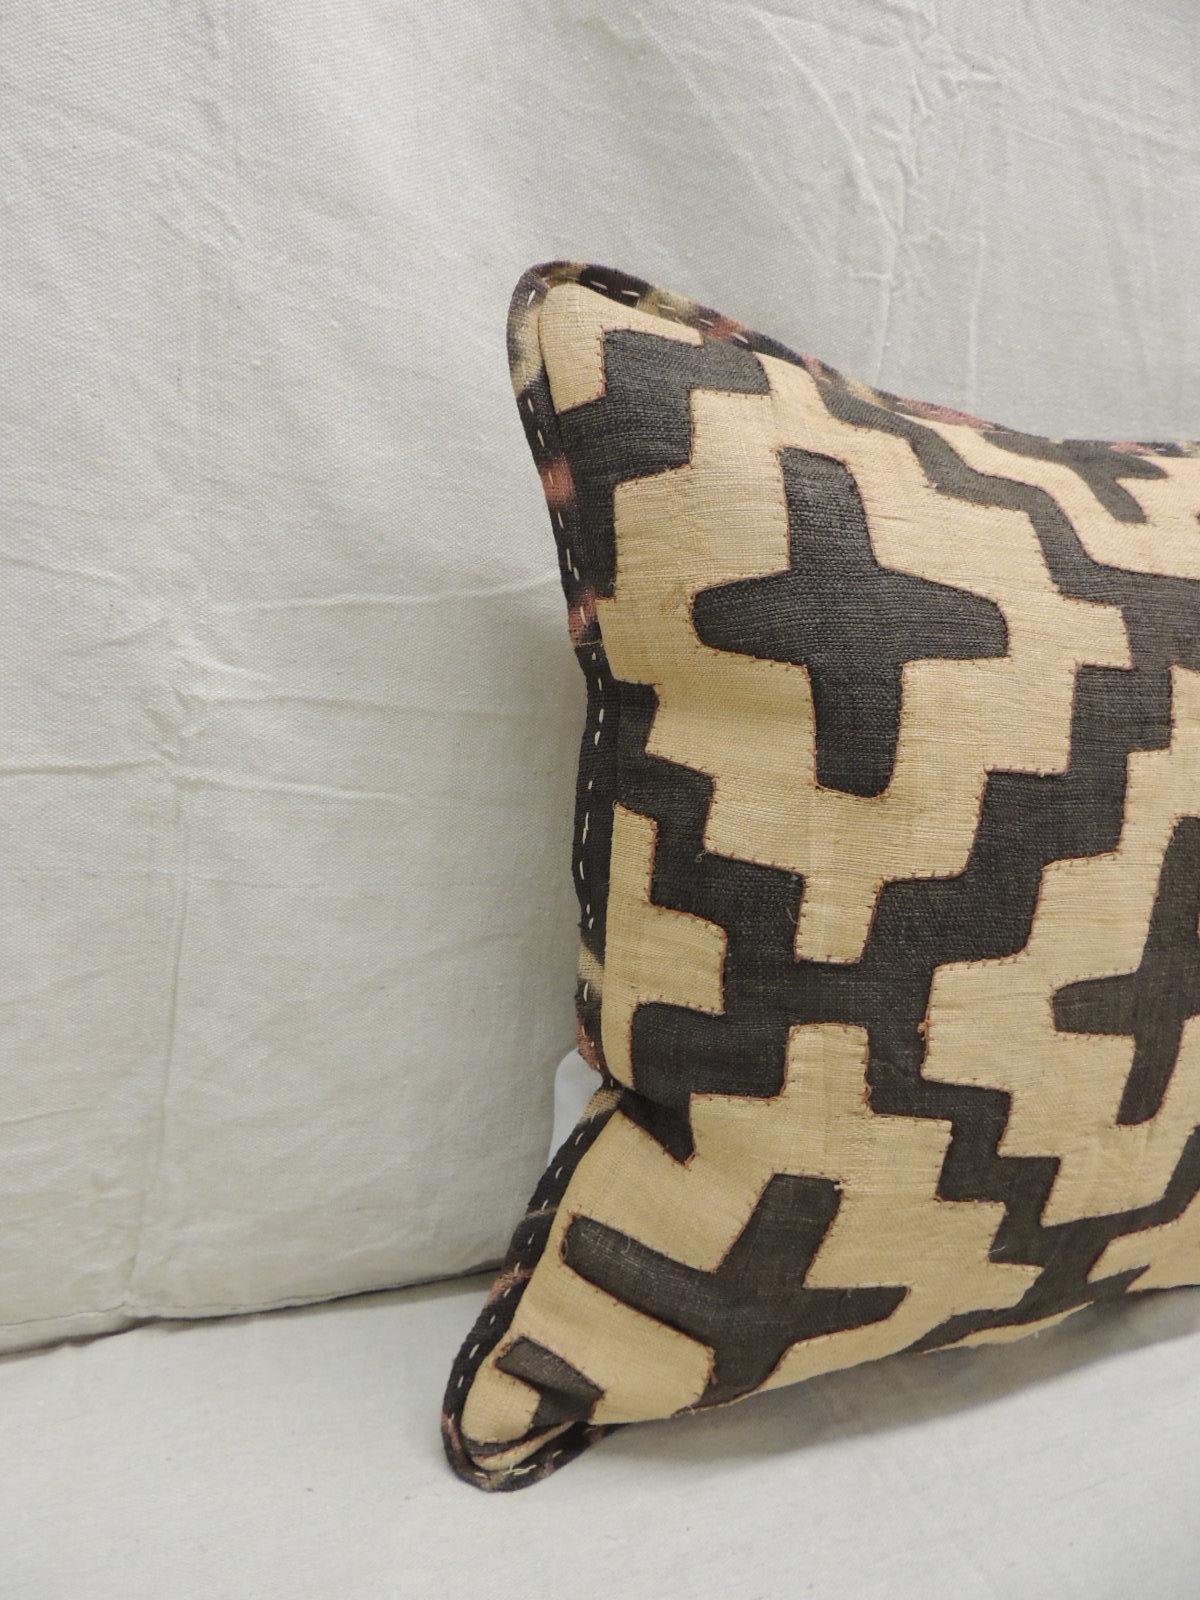 Vintage Kuba tan and black handwoven patchwork African decorative pillow.
Handwoven patchwork and appliqué raffia African decorative lumbar pillow with labyrinth pattern.
We used the original textile frame as a trim all around the pillow. Light Gris